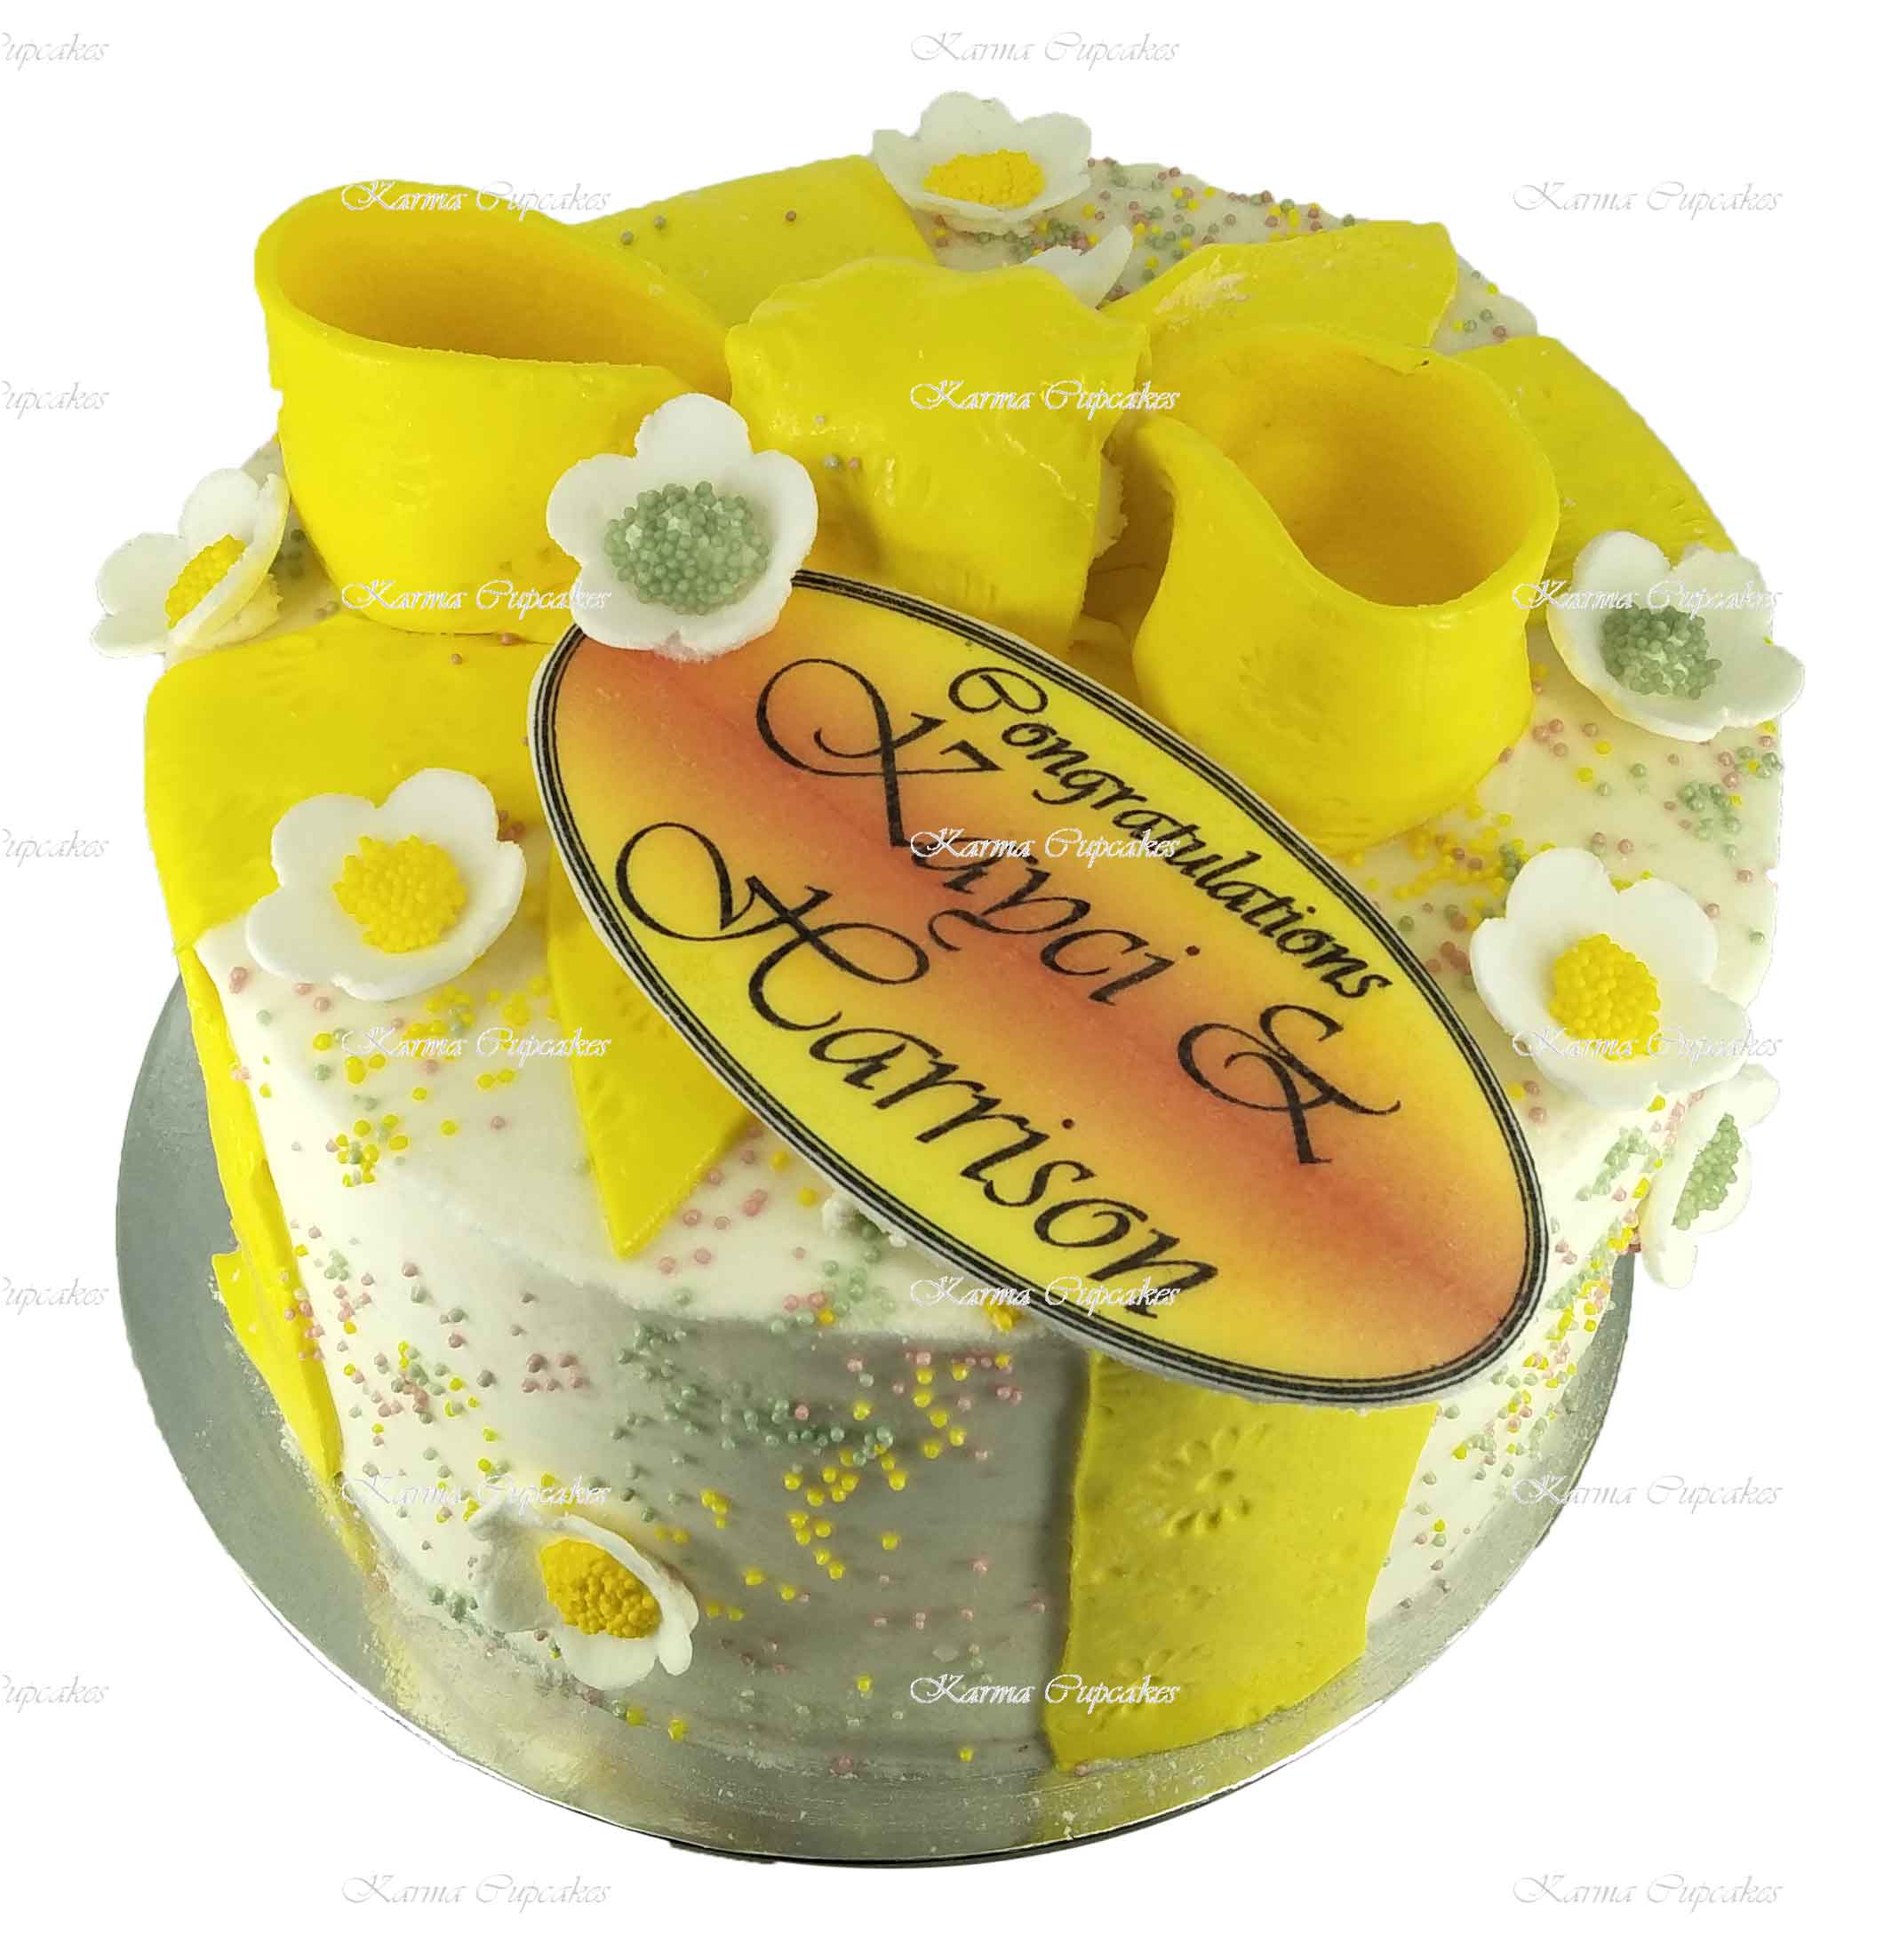 yellow-edible-ribbon-and-flowers-cake-congratulations-(2)